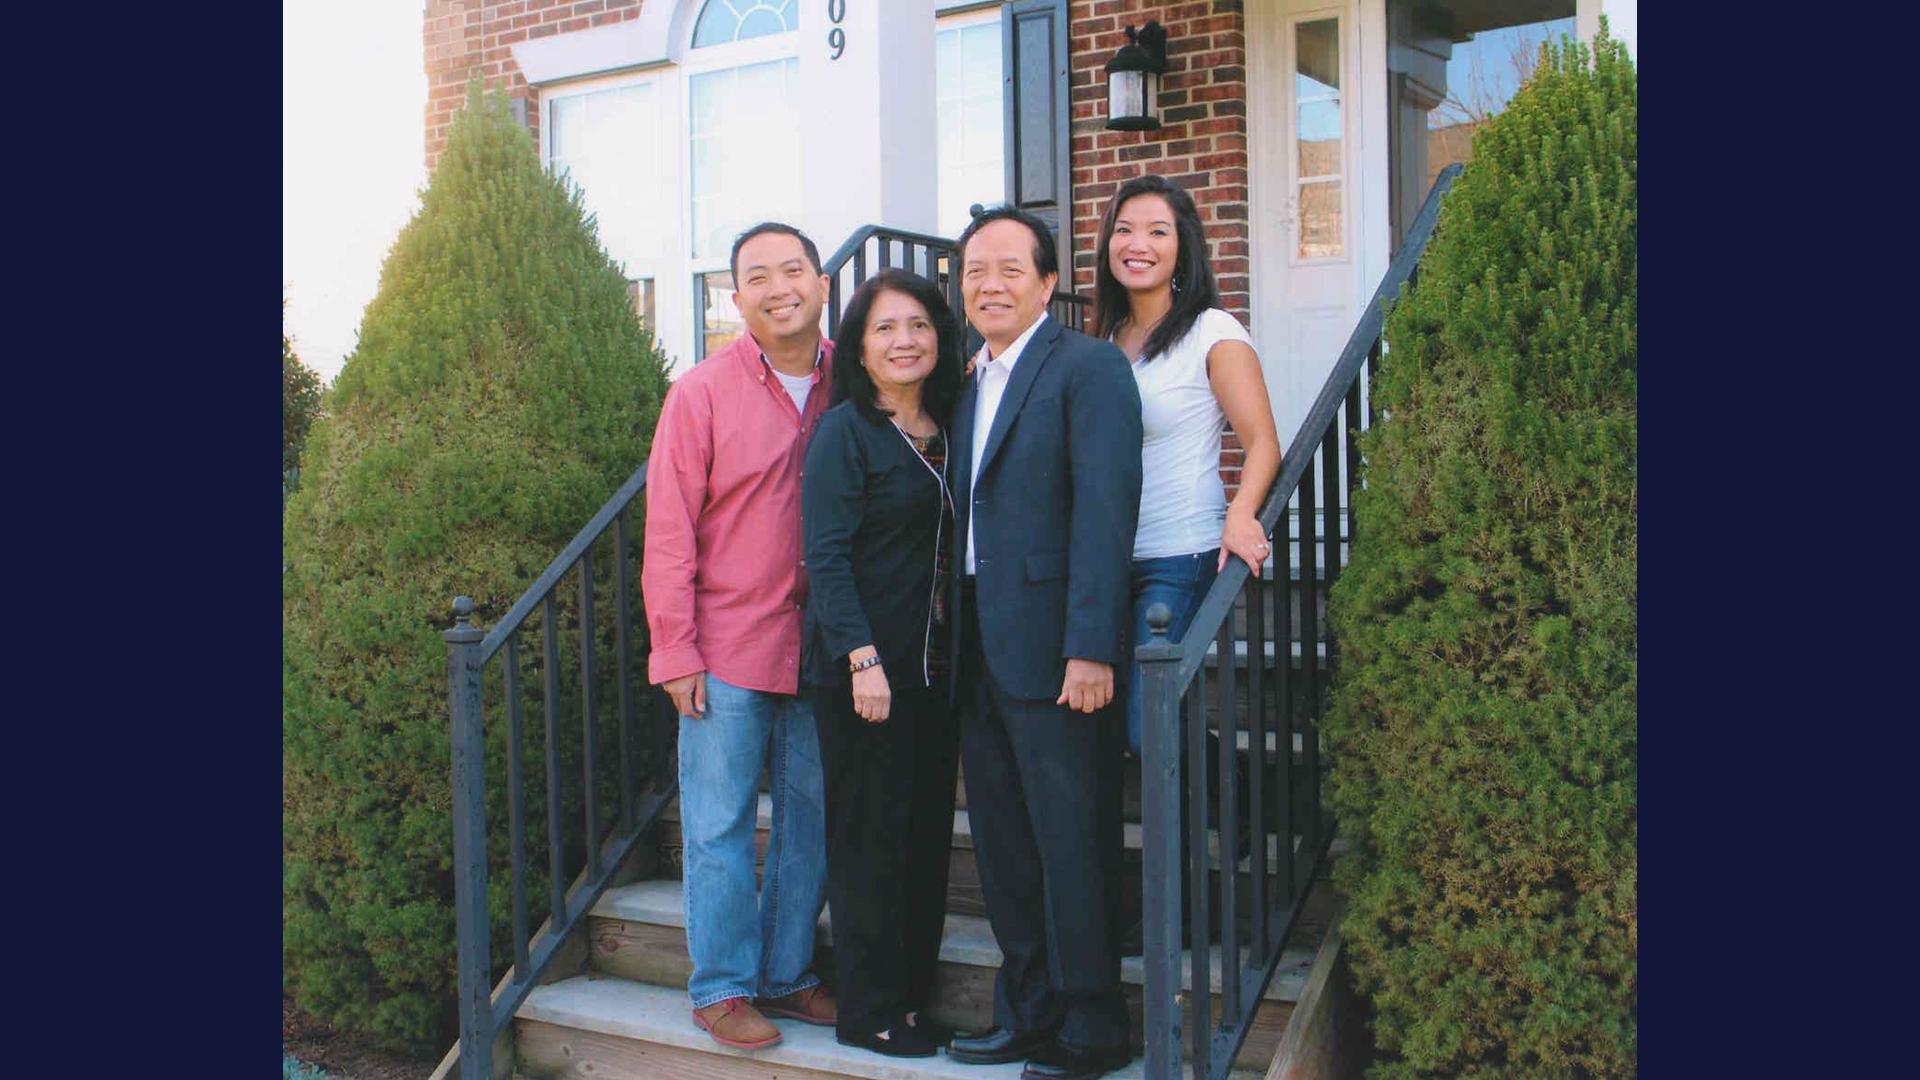 Corazon Amurao, second from left, and family.